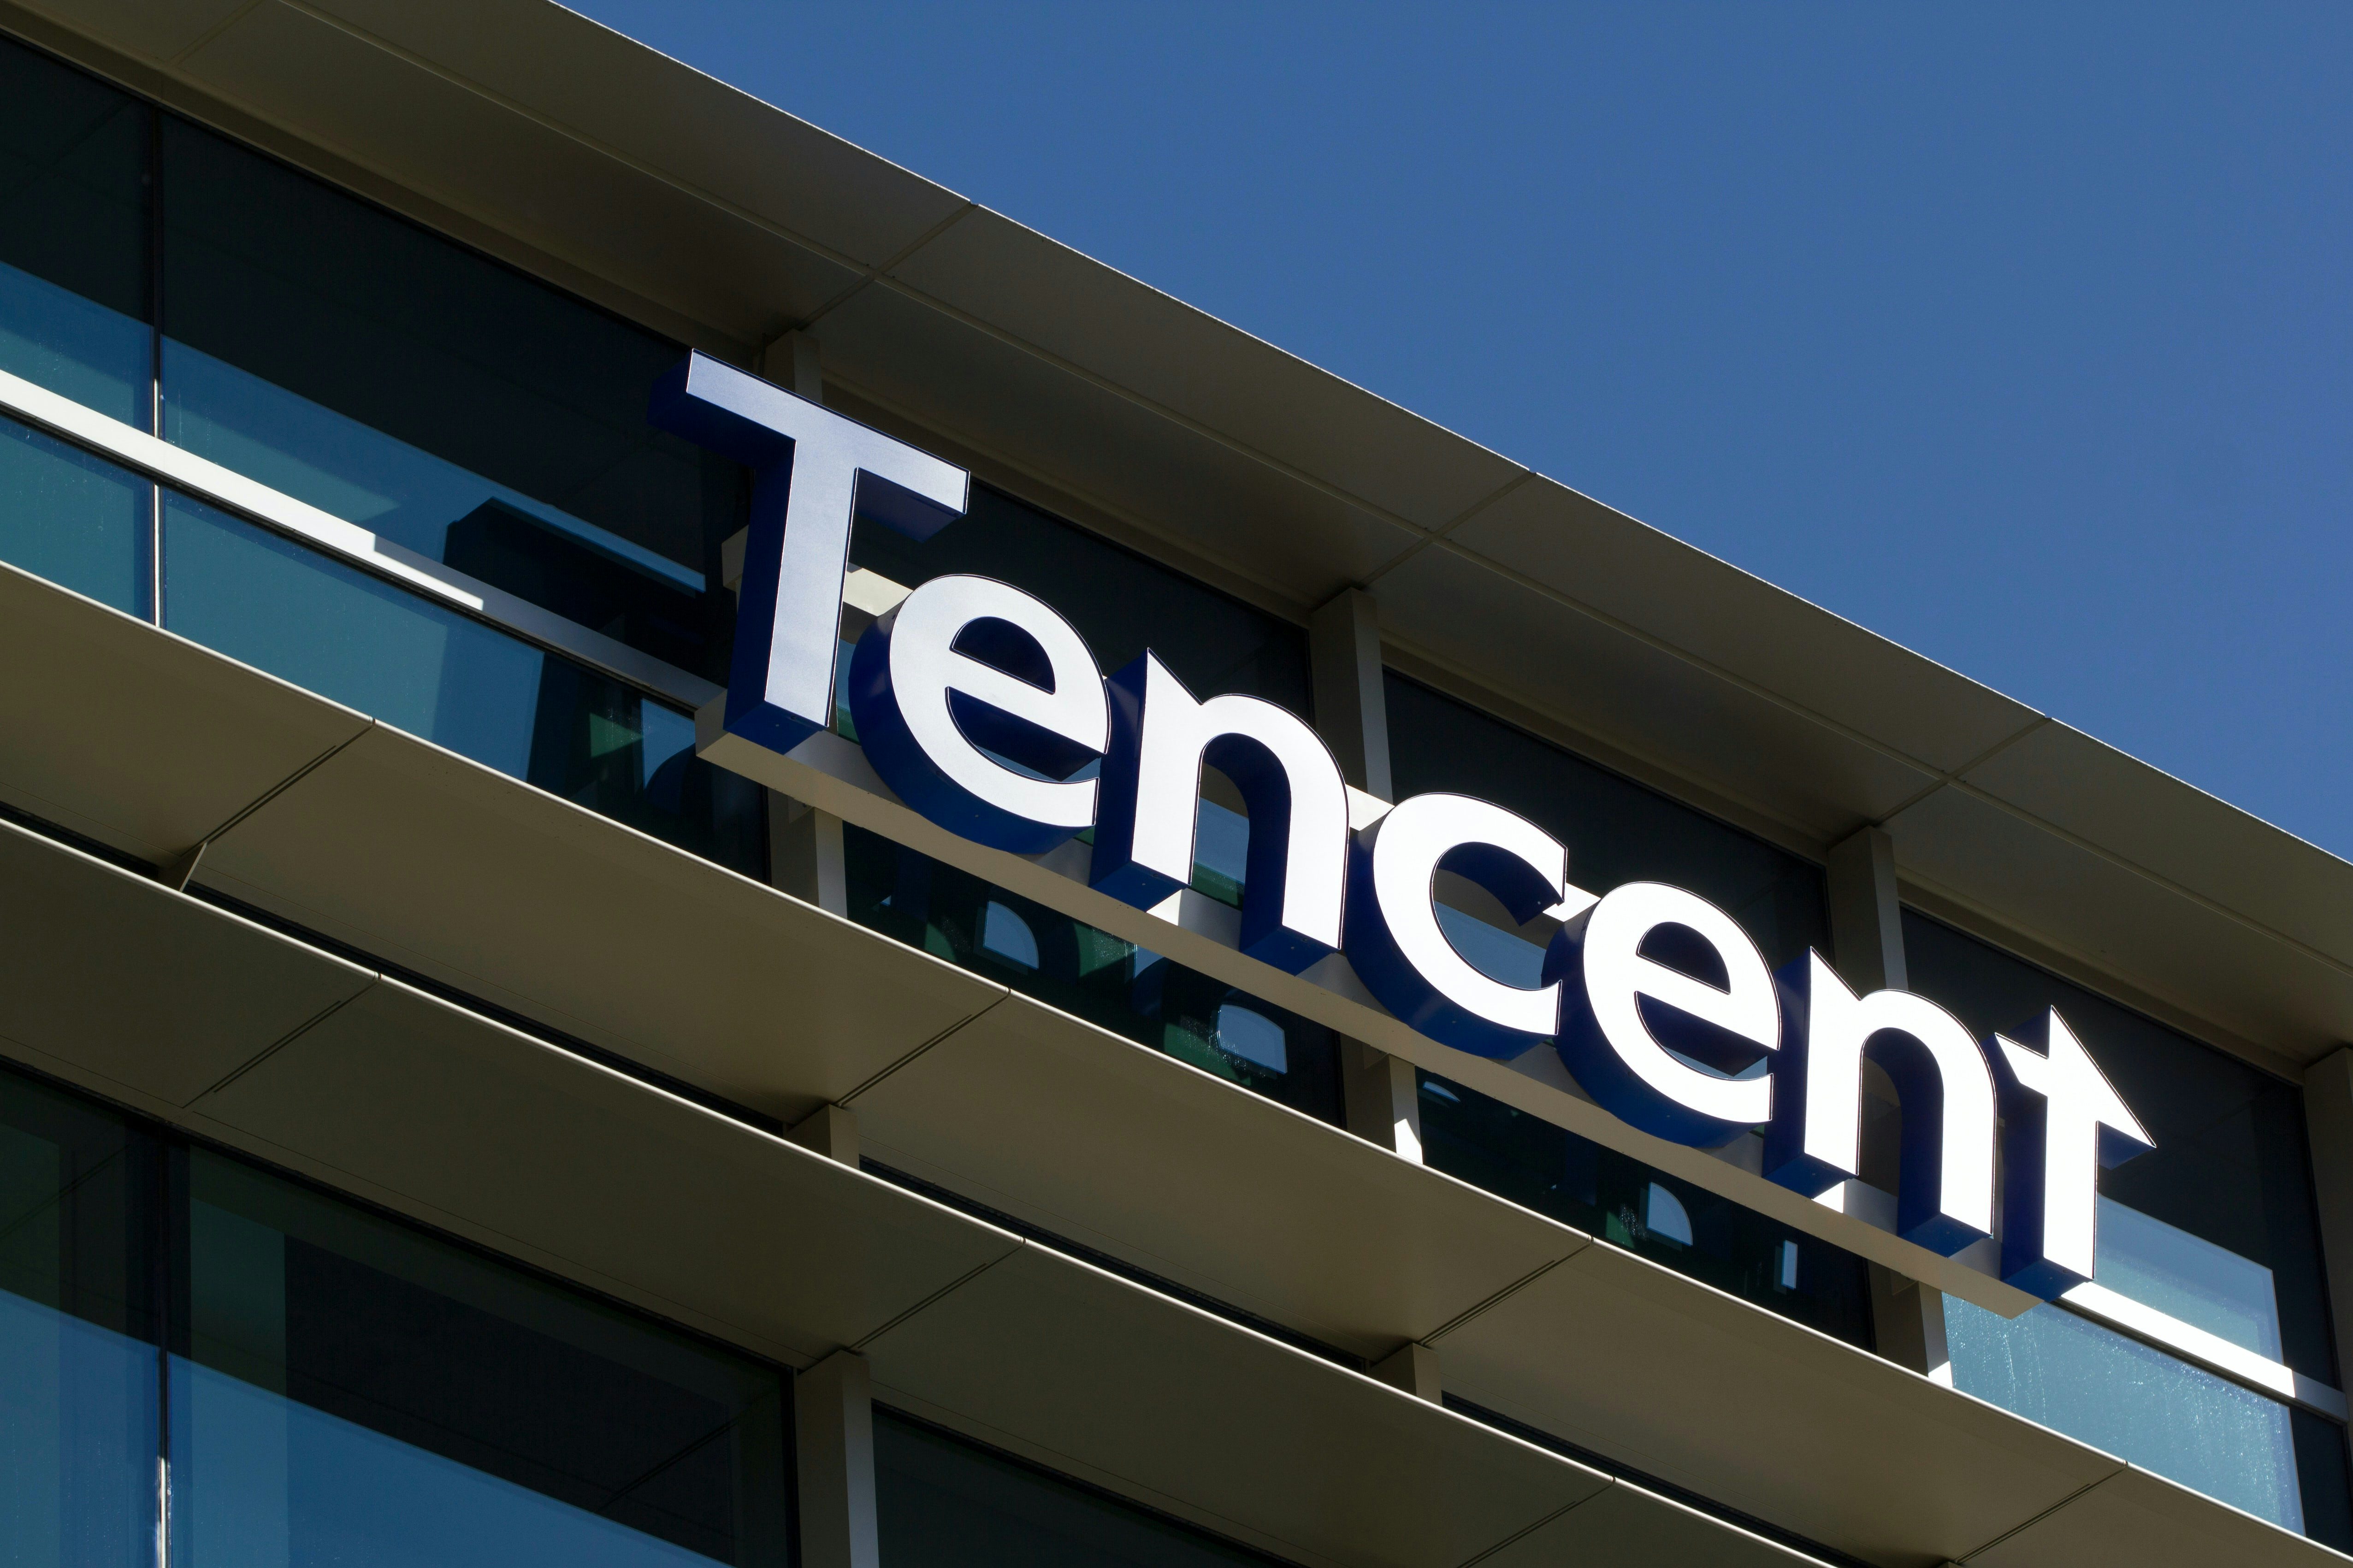 Tencent signage. Shutterstock.